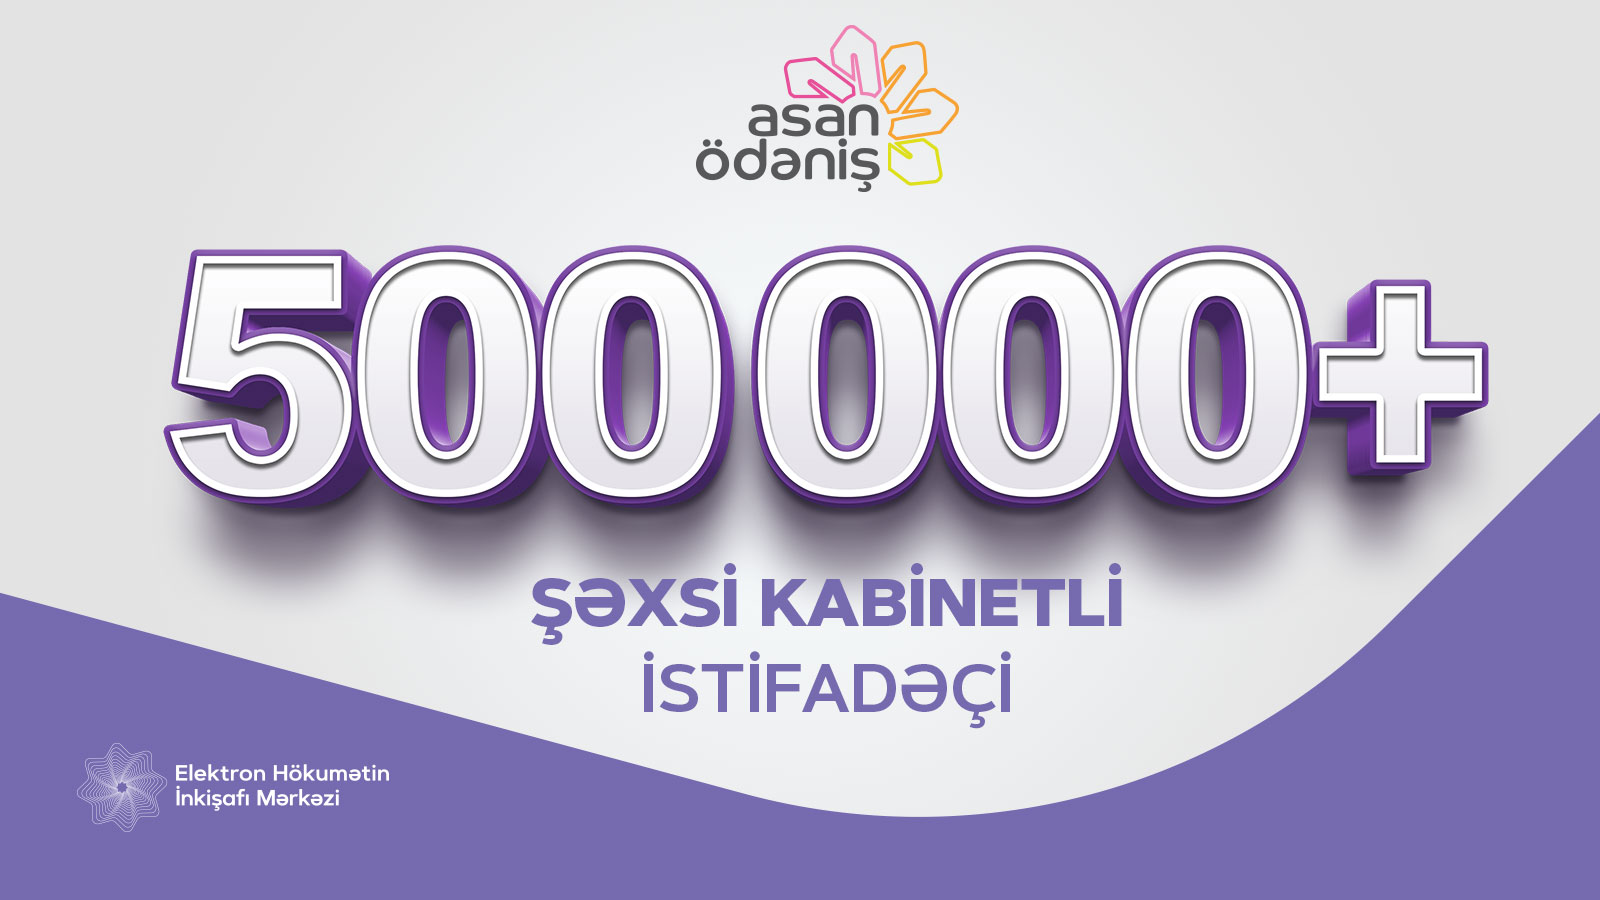 The number of personal cabinets in "ASAN payment" has exceeded 500,000